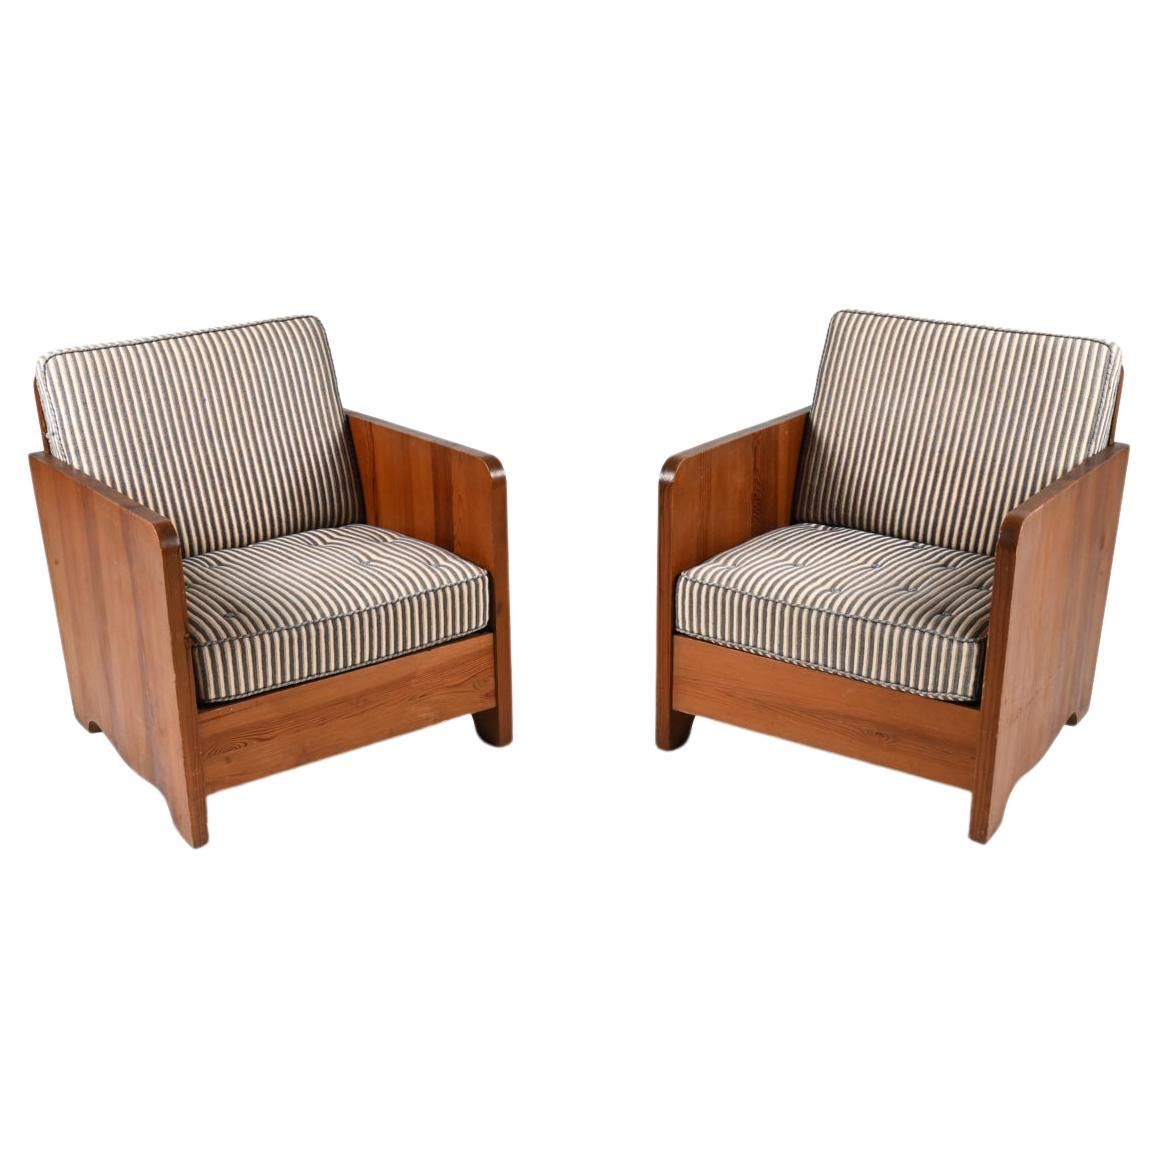 Pair of Scandinavian Pine Easy Chairs Attributed to Axel Einar Hjorth